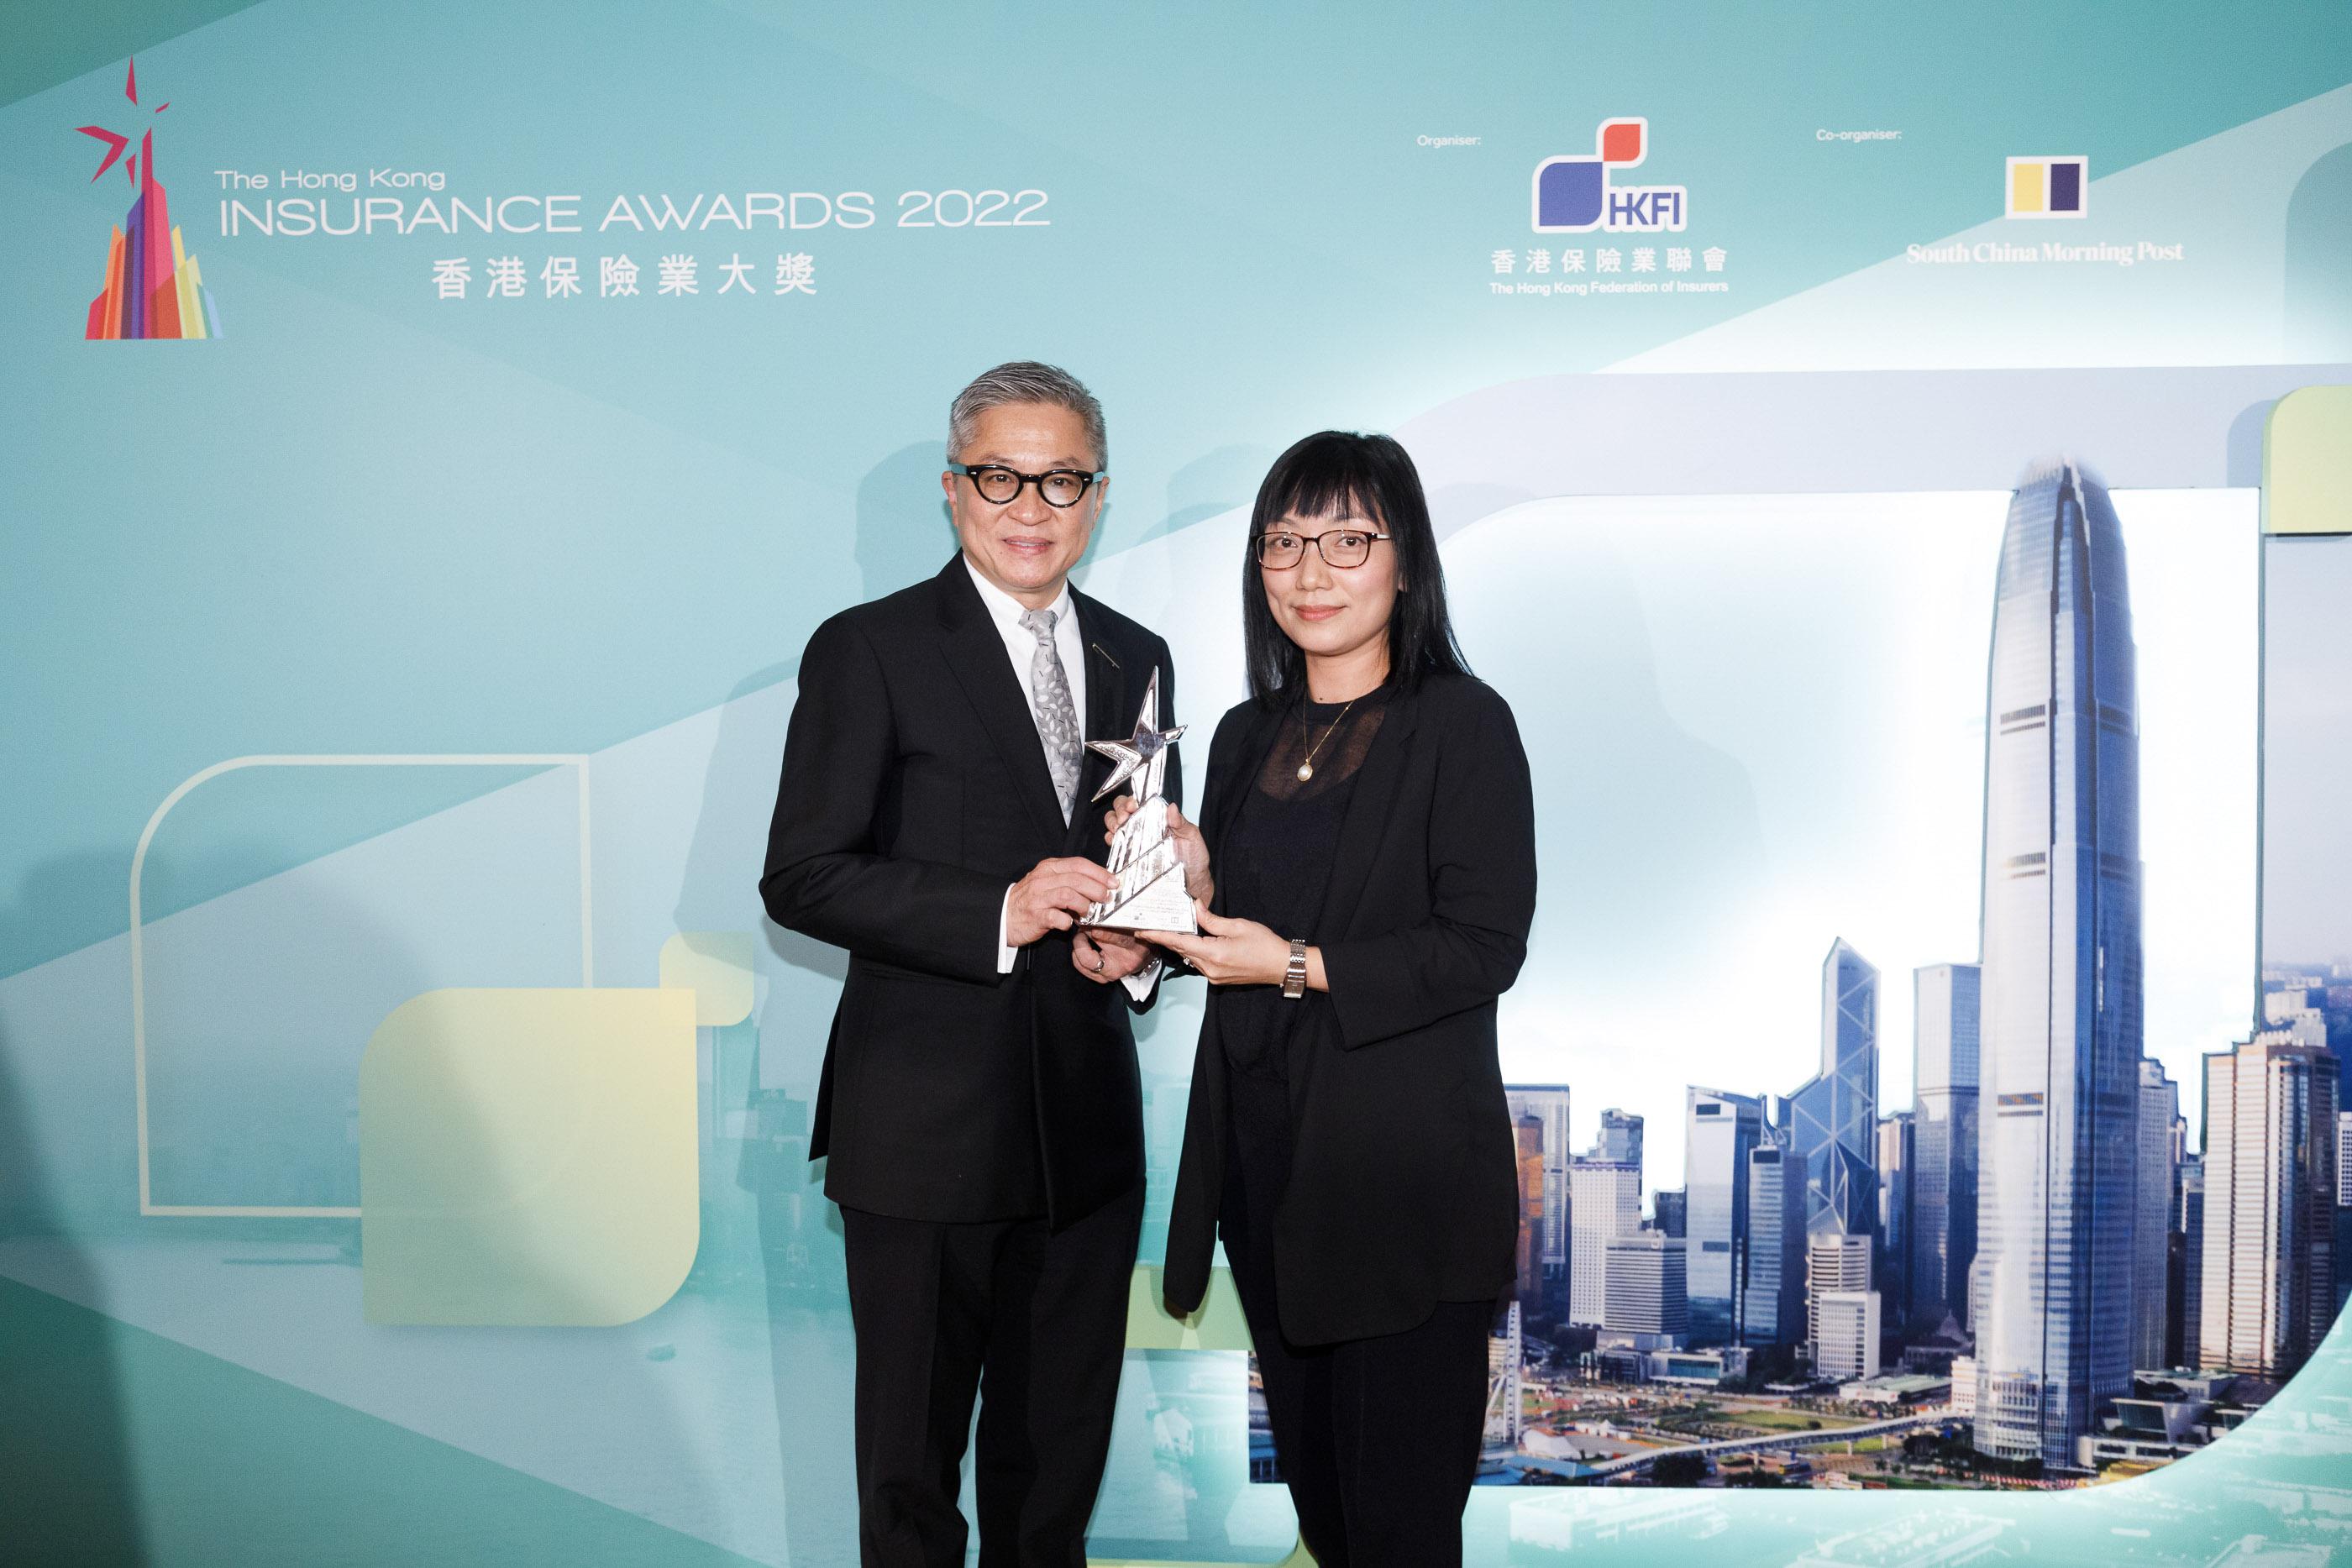 Mr. Peter Yip, Vice President of Marketing at YF Life (left), and Ms. Shirley Yau, Assistant Vice President of Policy Owner Services at YF Life (right), receive the accolade of Top 3 Finalists in “Outstanding Initiative on Community Health Crisis Award” at The Hong Kong Insurance Awards 2022.